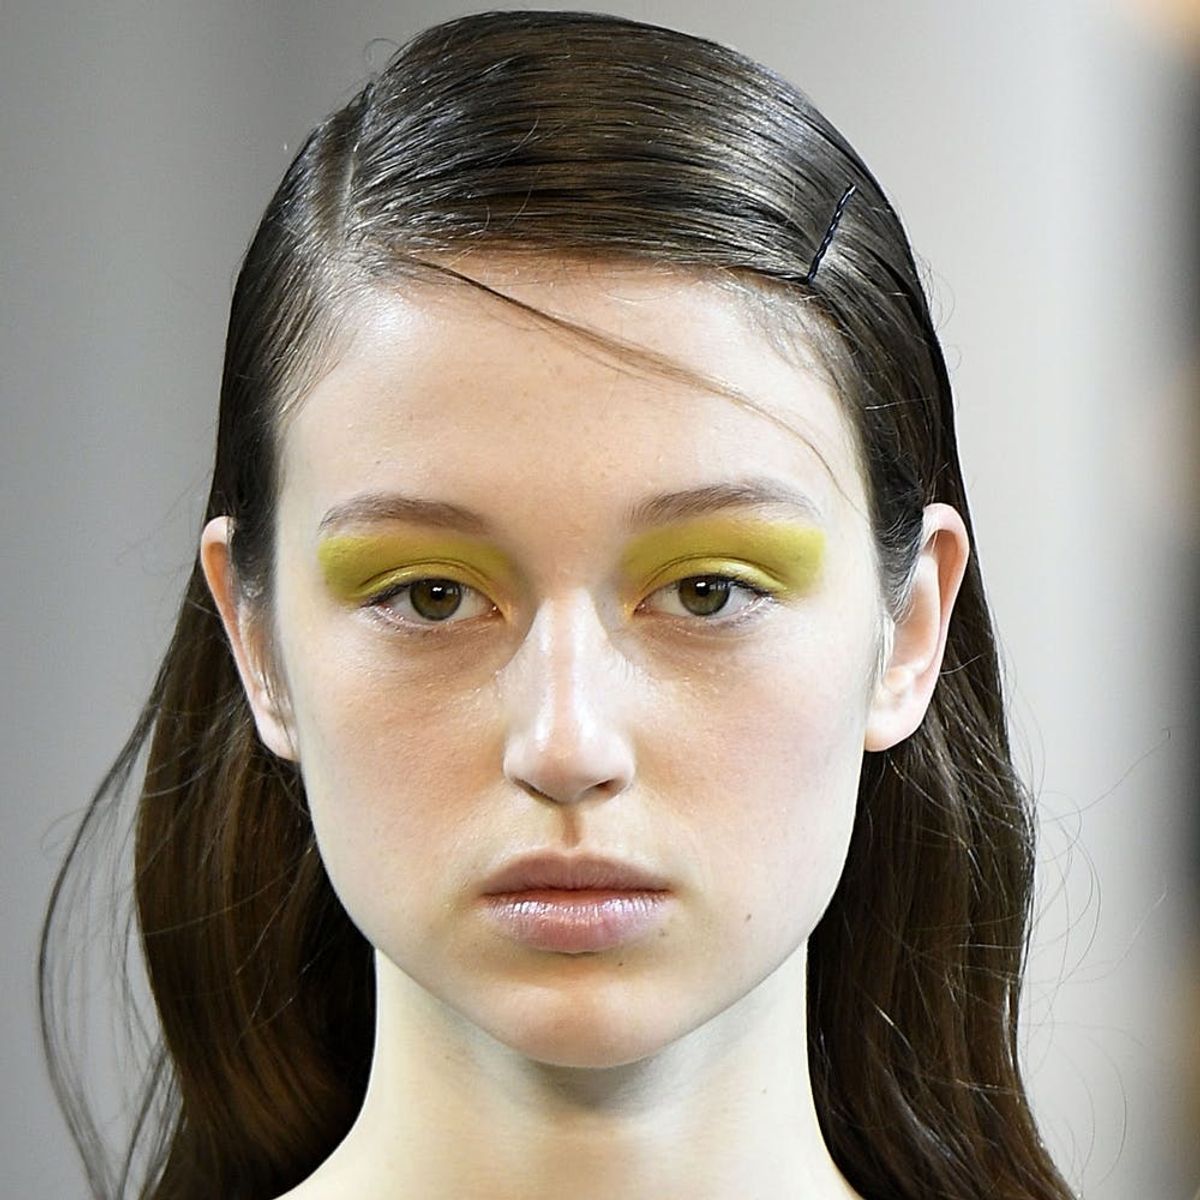 Yellow Eyeshadow Is Having a Serious Moment, You Guys